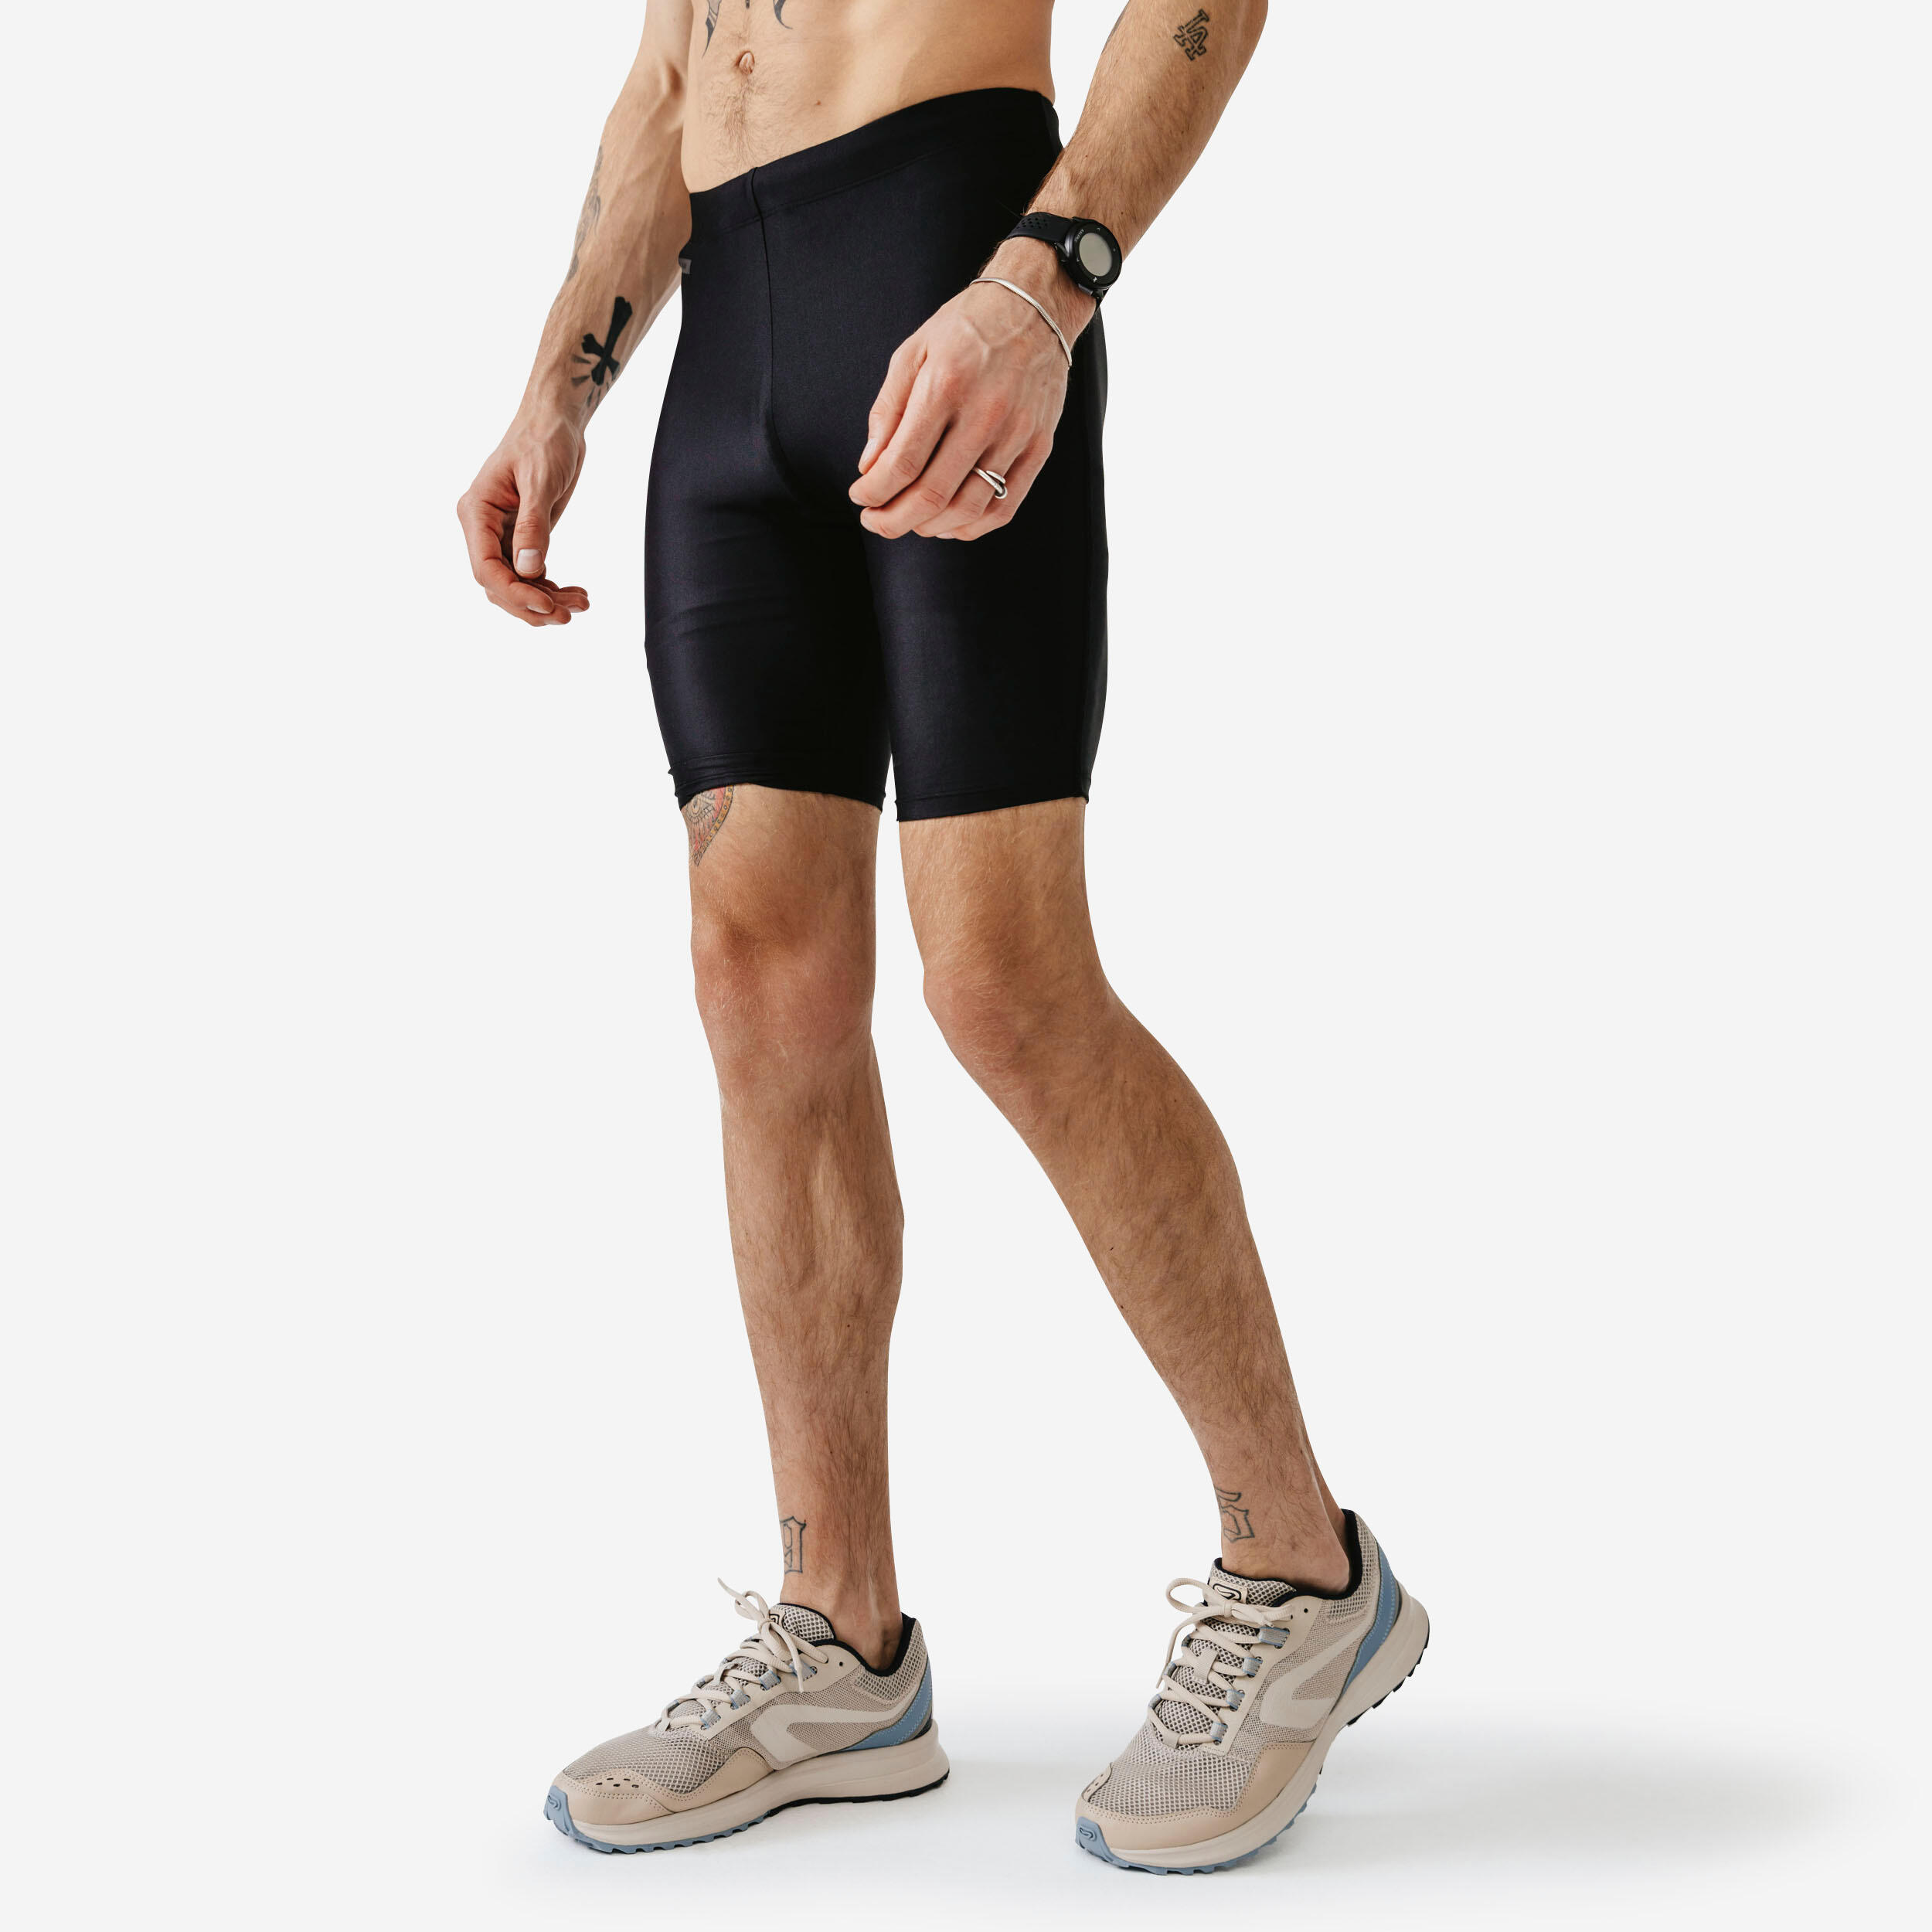 Men's winter running shorts with extra warm inner leggings and pockets